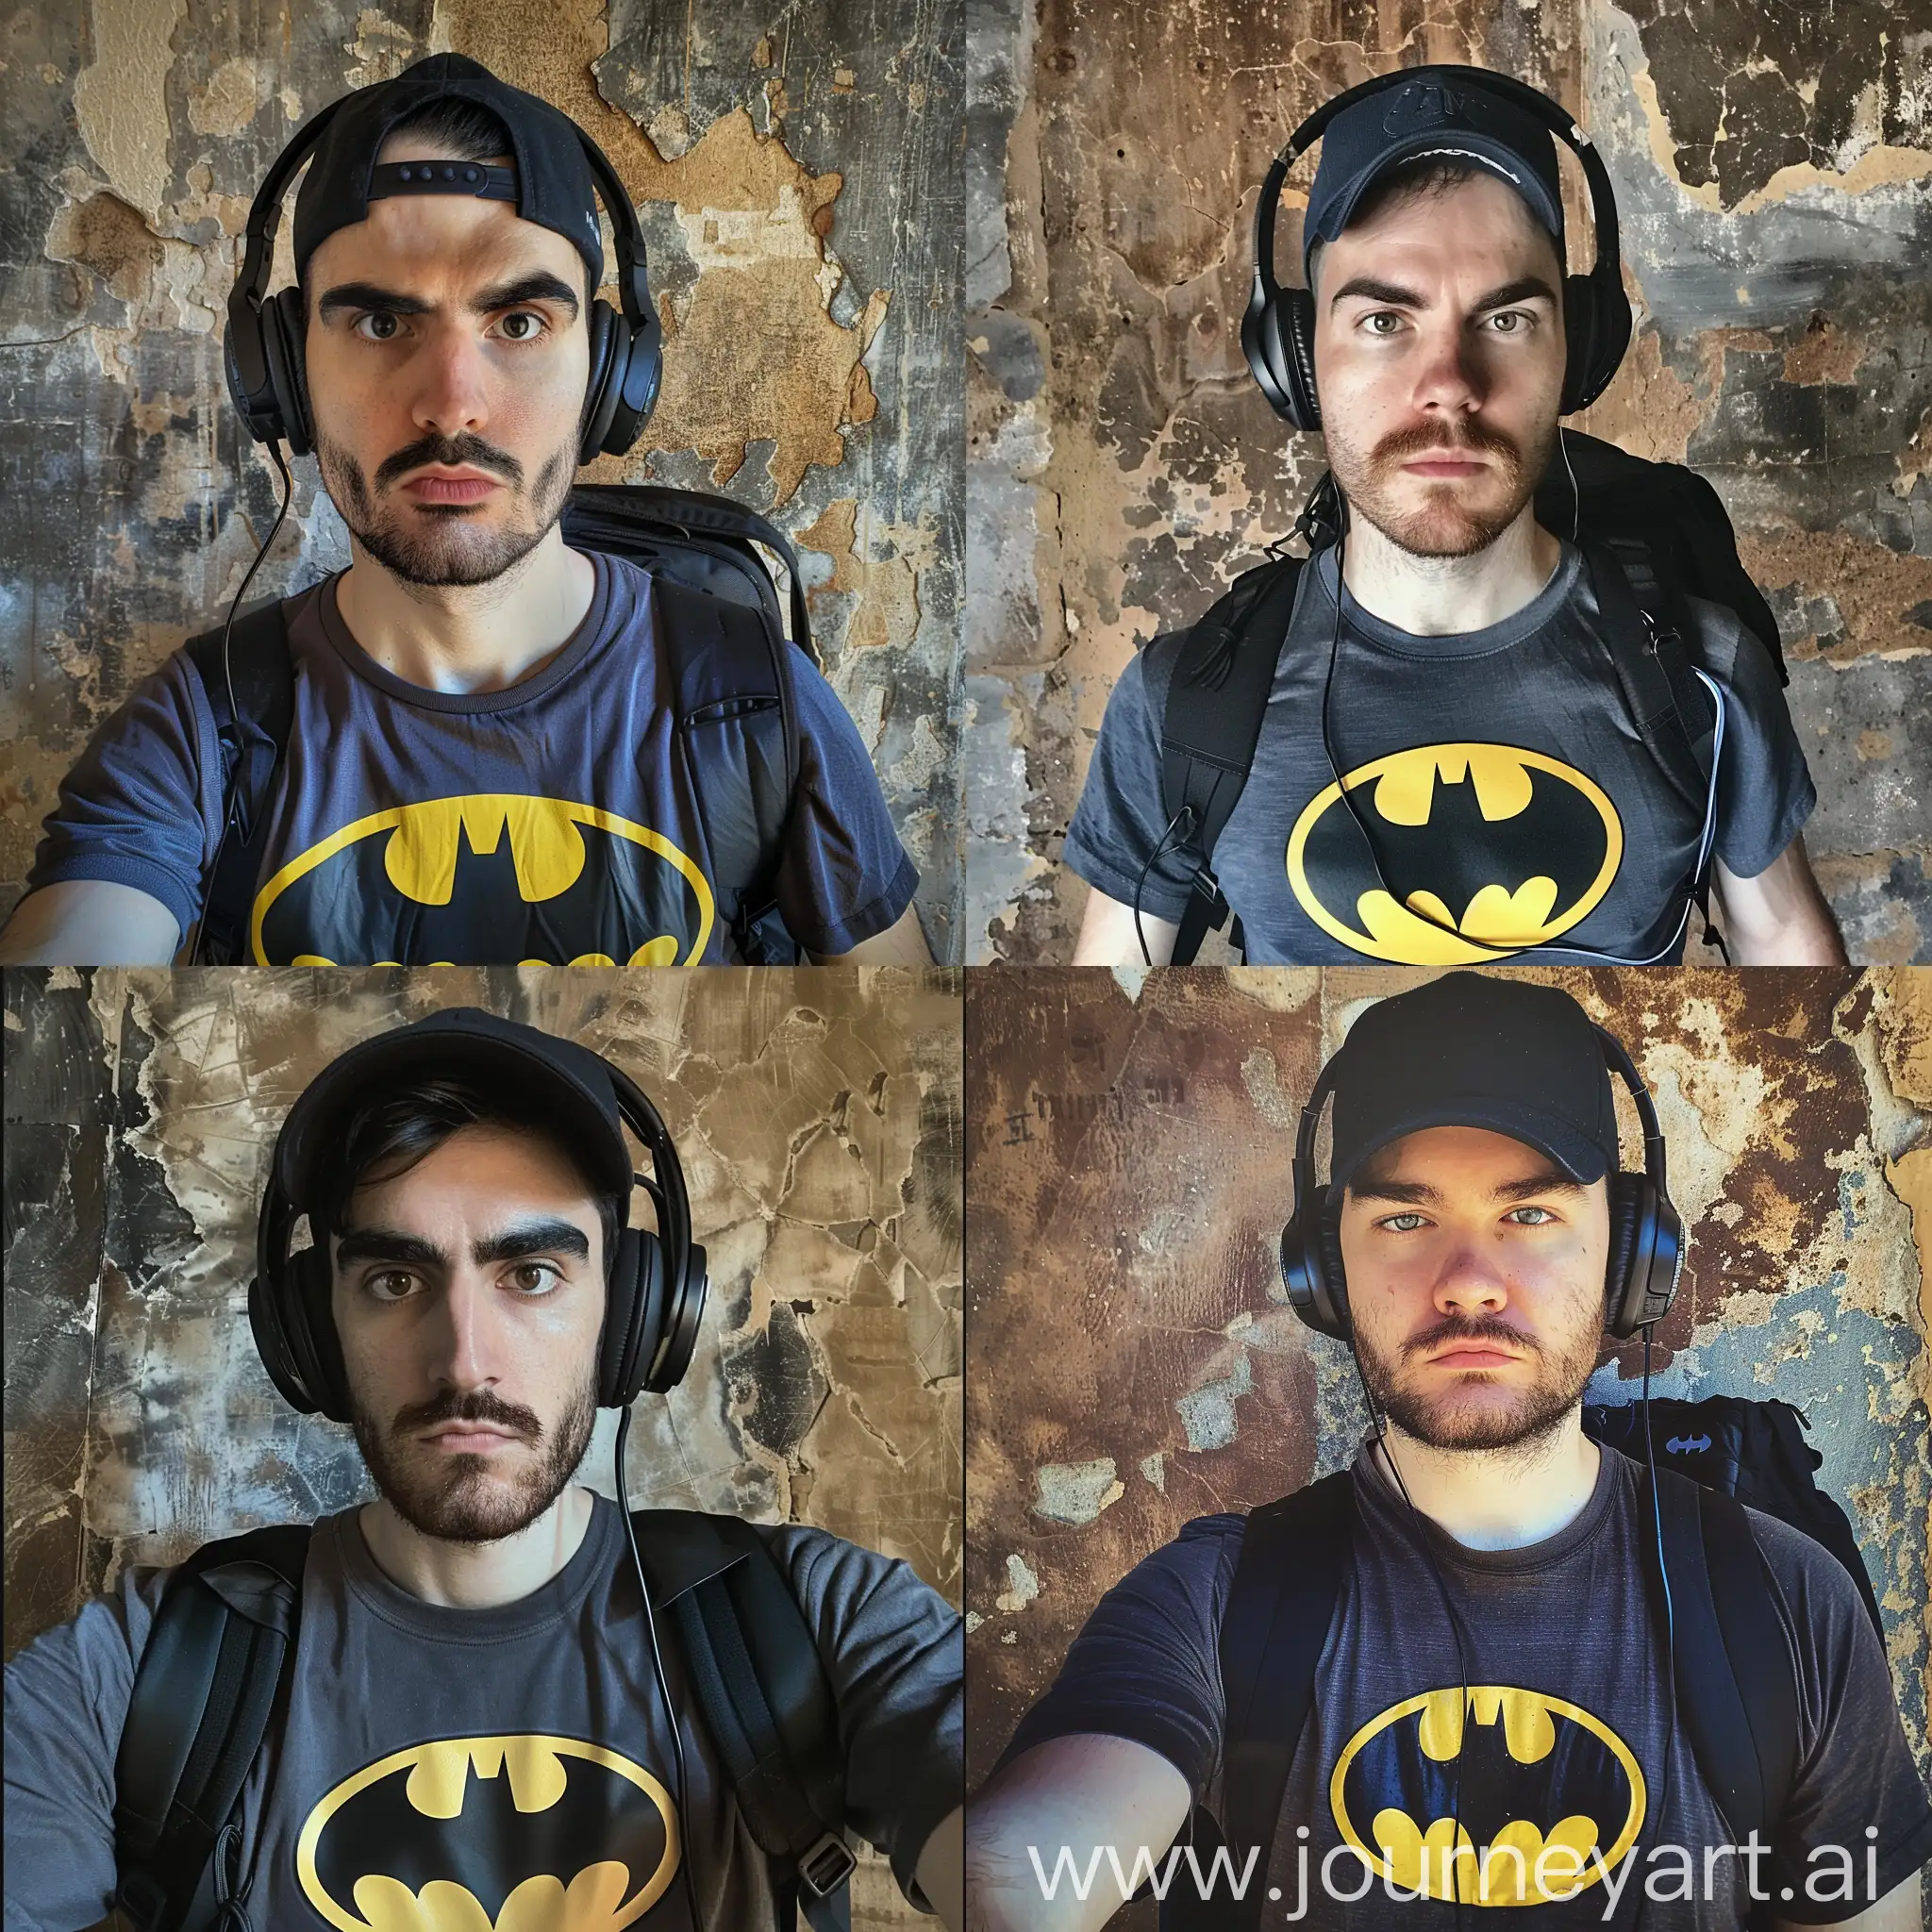 Young-Man-with-Batman-Shirt-and-Backpack-Listening-to-Music-Against-Aged-Wall